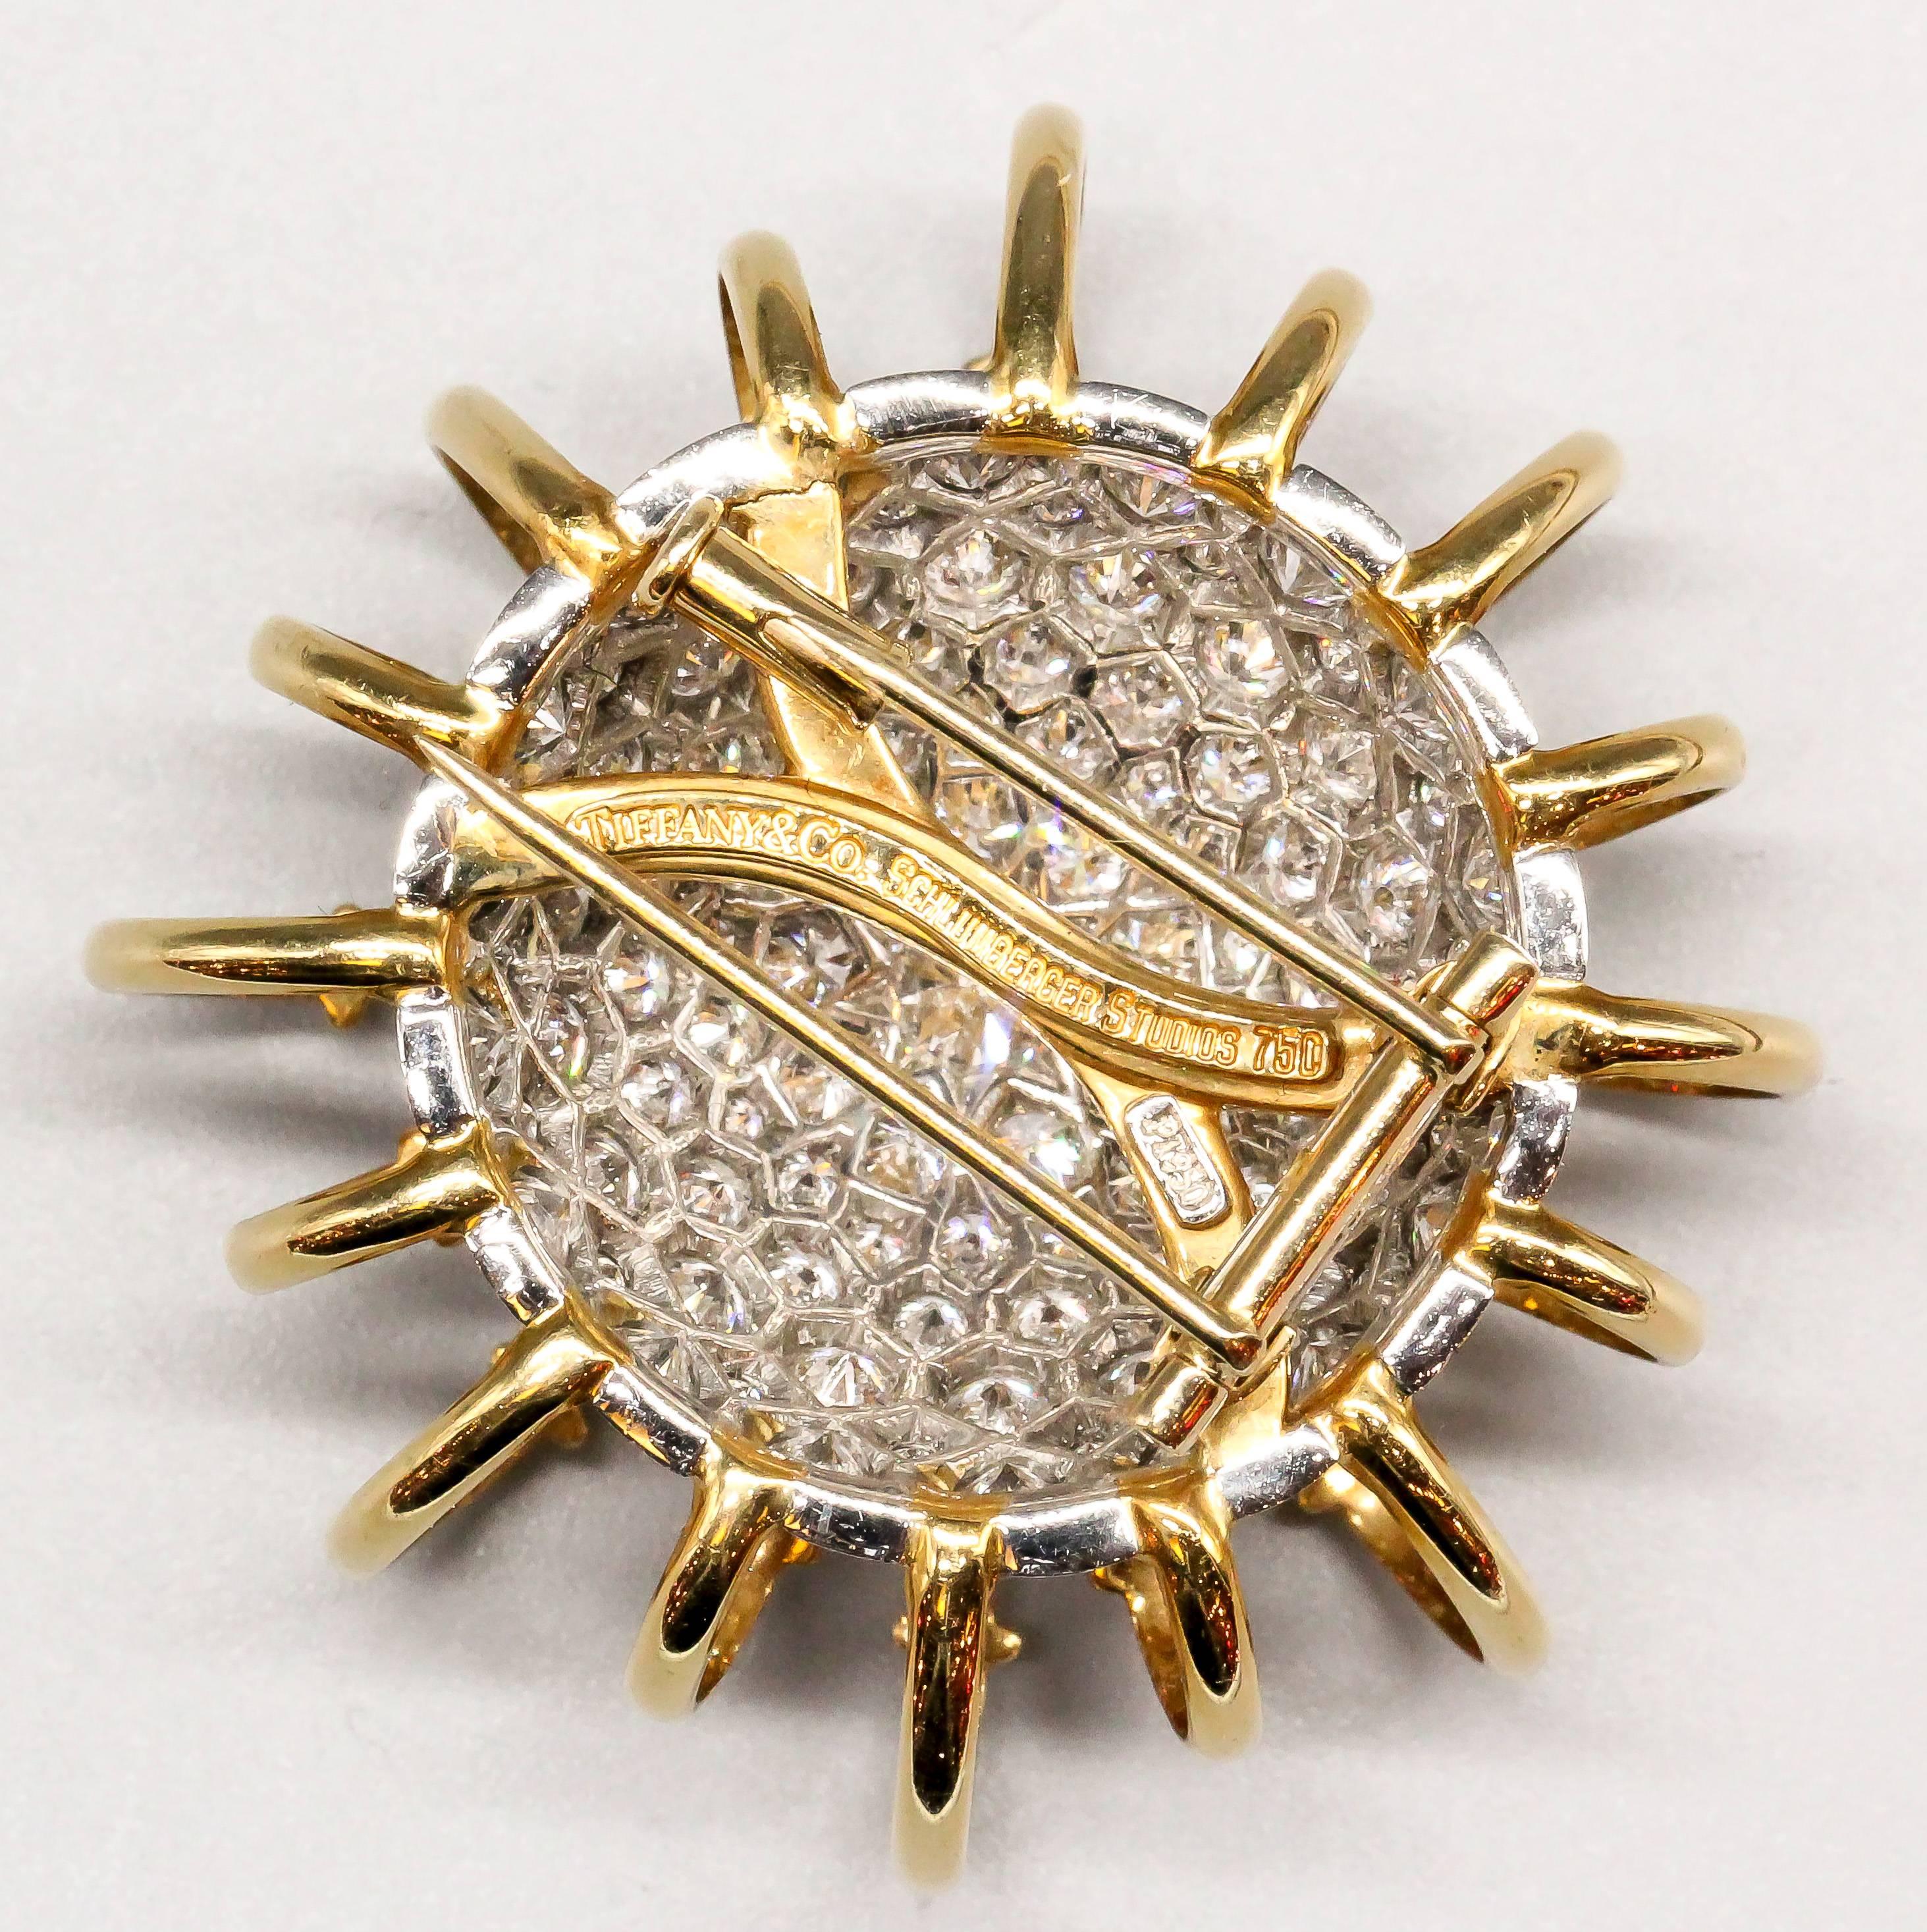 Rare and unusual diamond, platinum and 18K yellow gold brooch from the 